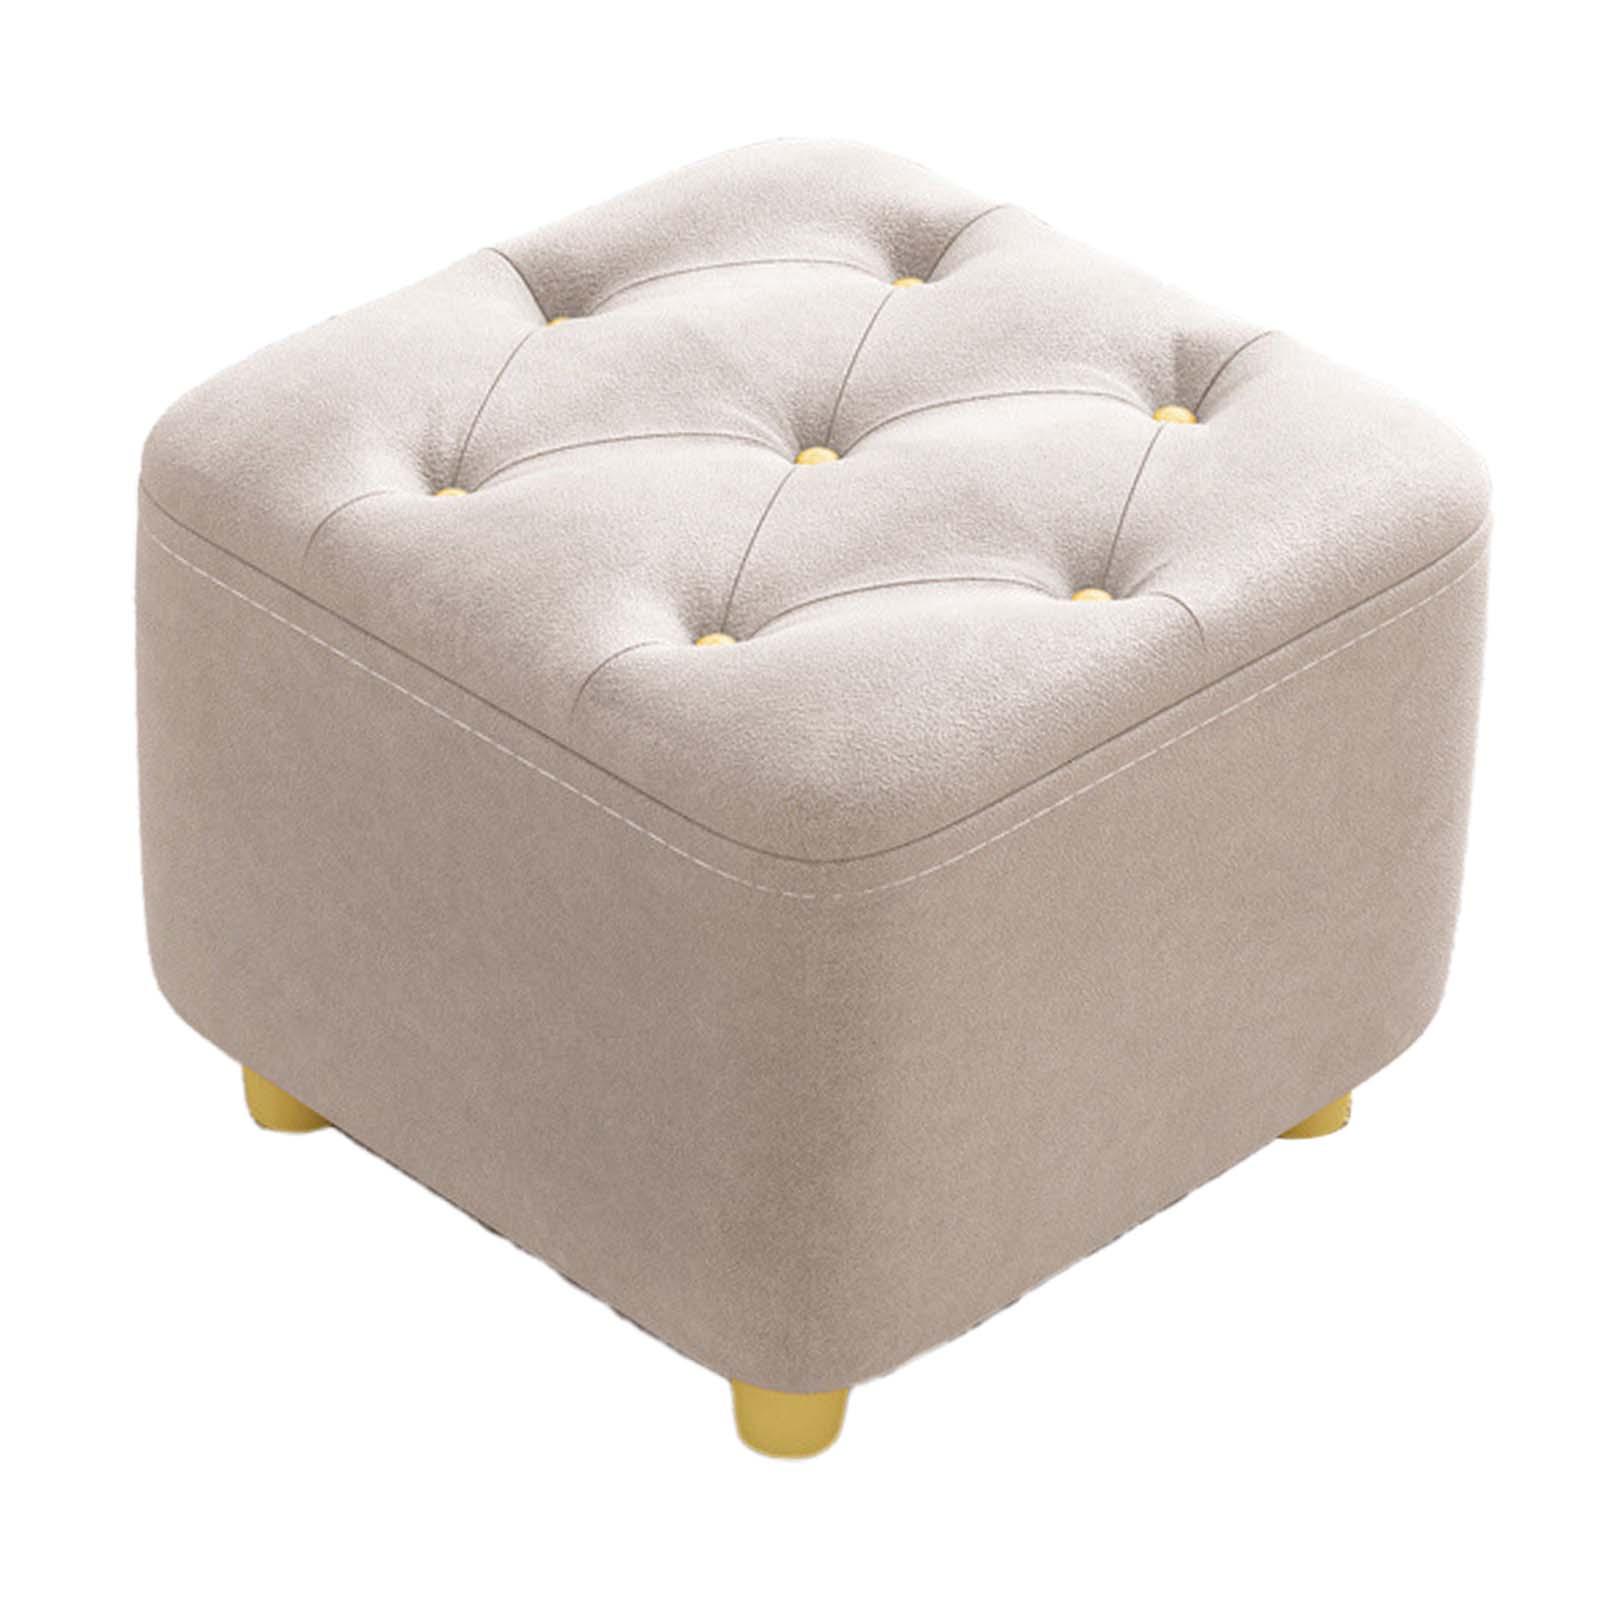 Square Footstool Foot Stool Comfortable Stepstool Creative Ottoman Stool Footrest for Living Room Dressing Room Bedroom Couch beige - image 3 of 8